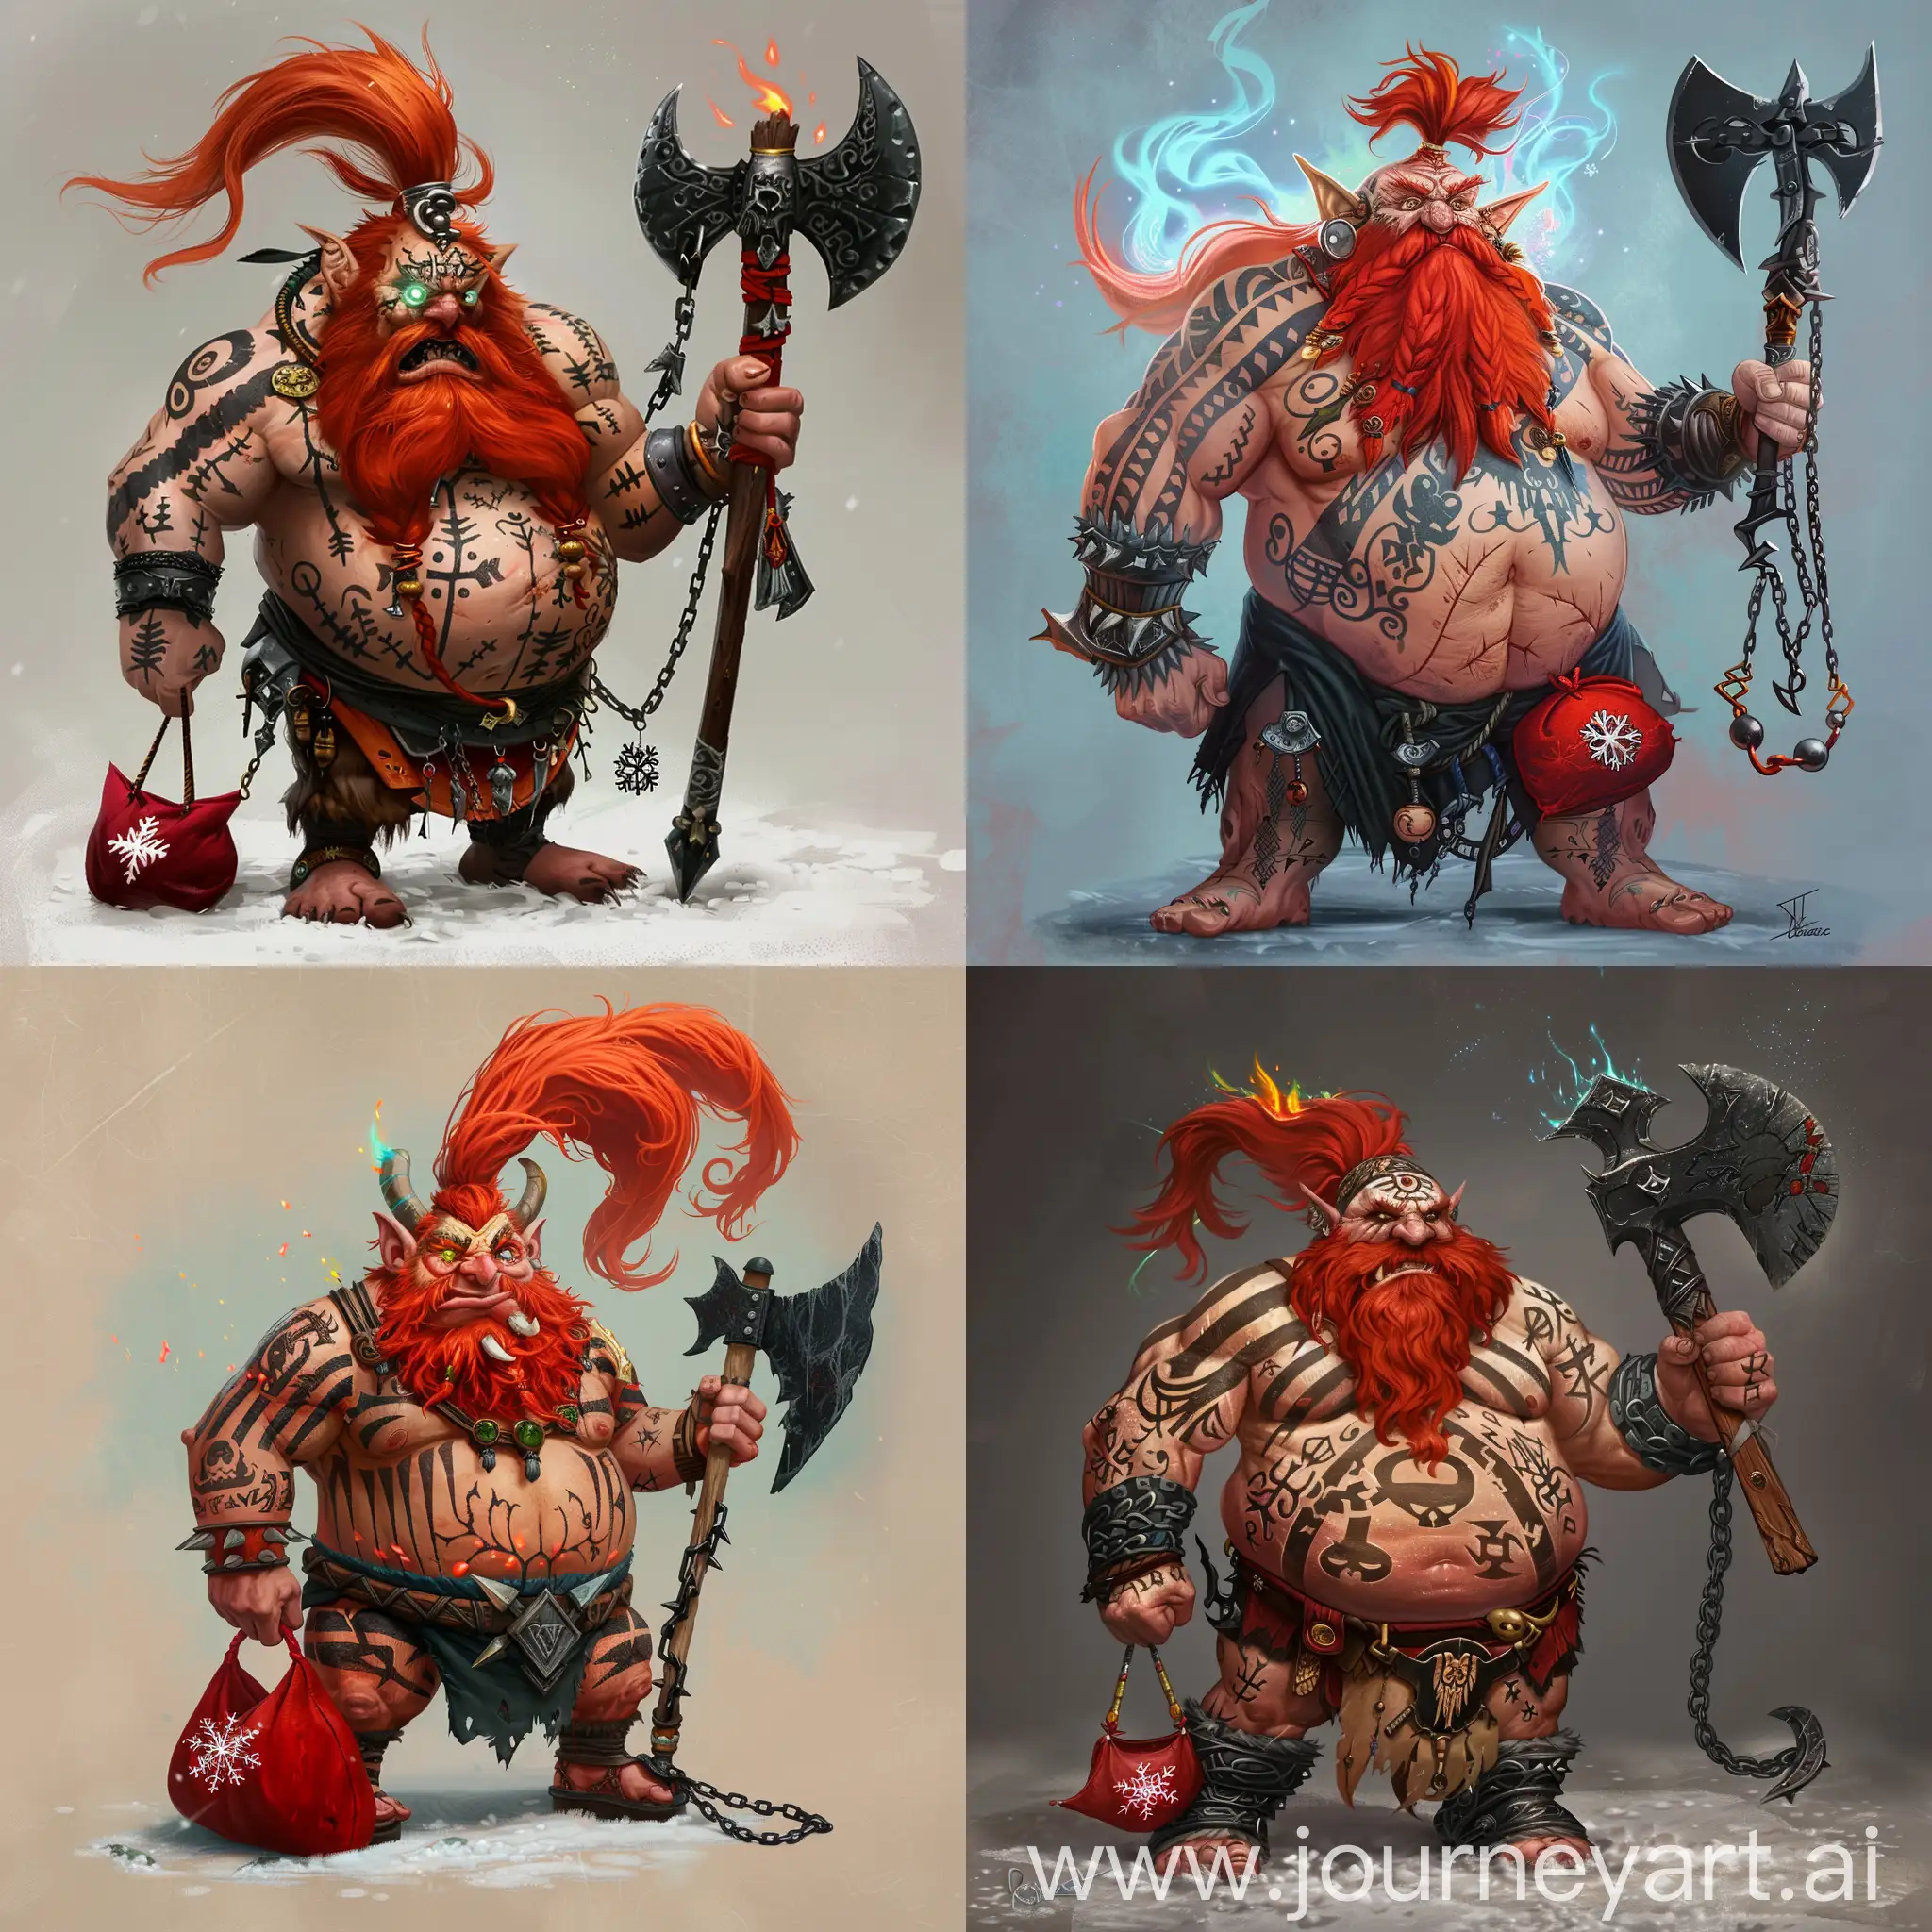 a fat barbarian dwarf named Bulgur is Red-haired, with a bare torso, red-haired with a long and wide tail of hair and a beard all in tattooed stripes all over his body, a small red bag with snowflakes on his belly, all ablaze with magic, his eyes burn with rainbow fire, evil yells at the top of his throat, brandishing a black metal axe on a chain (the chain is wound around the hand with which he holds an axe), despite the evil expression on his face, he is quite kind and iron-loving, an epic fantasy art character
